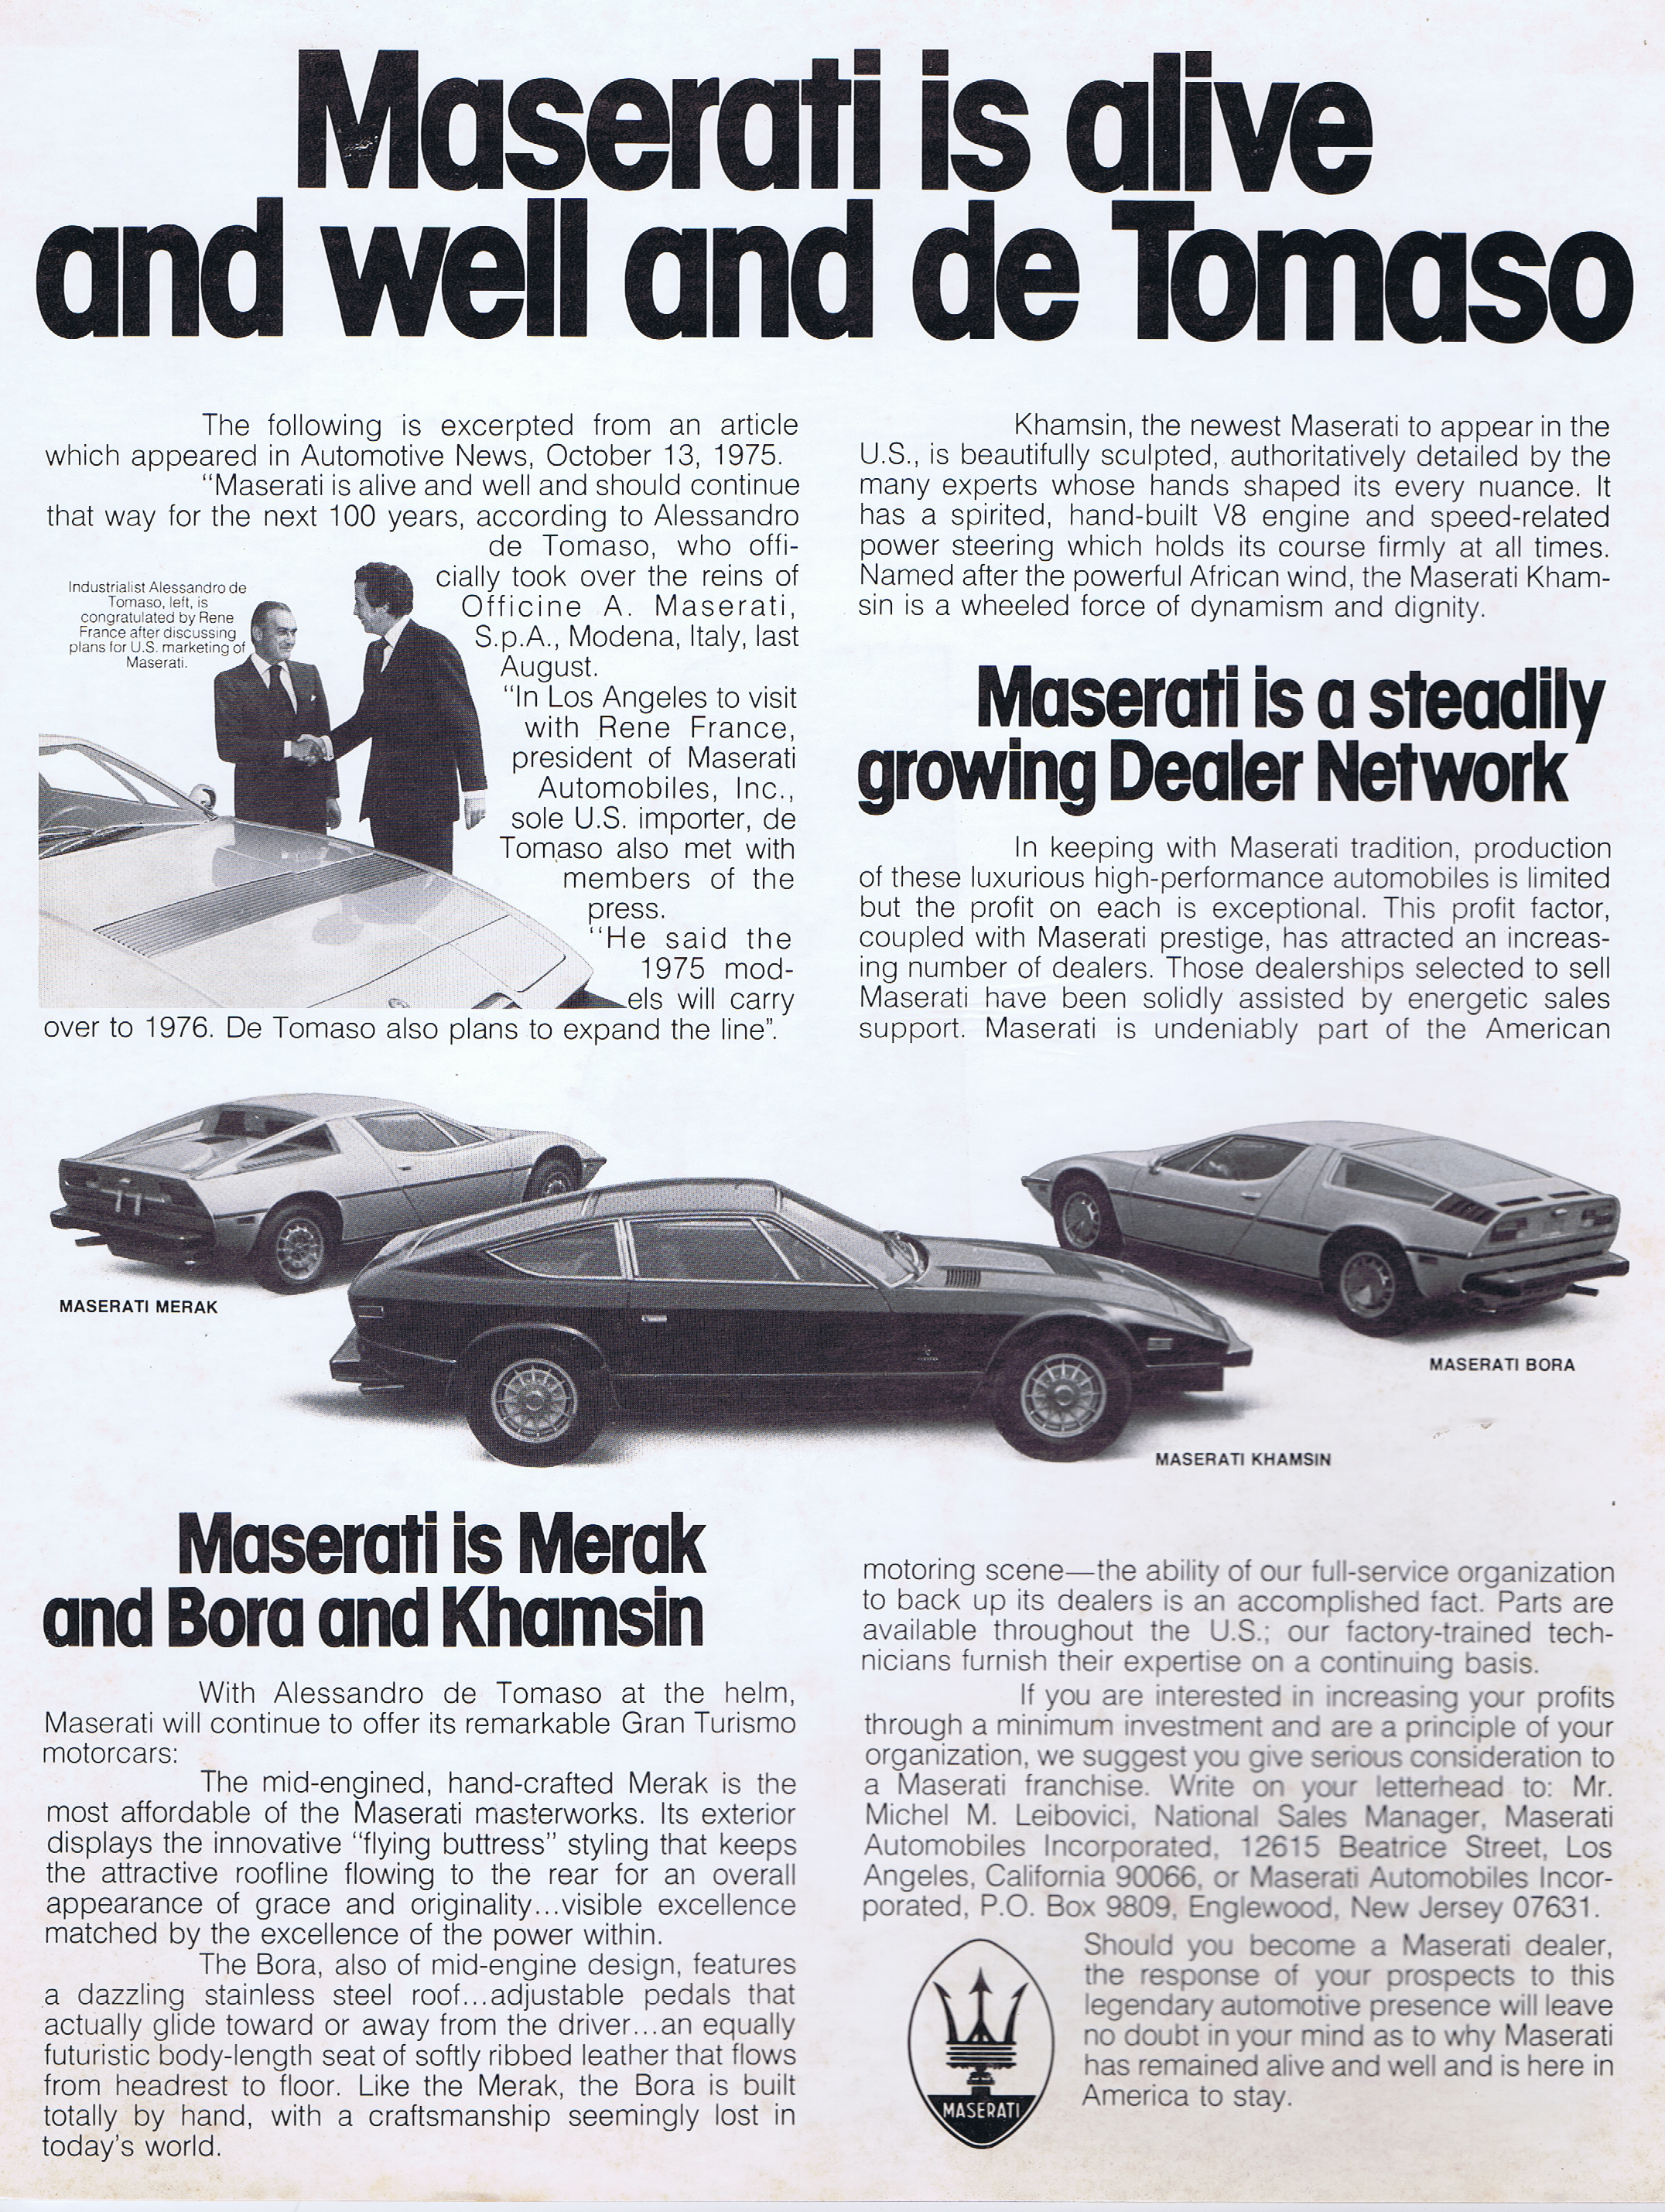 J826	MASERATI IS ALIVE AND WELL AND DE TOMASO